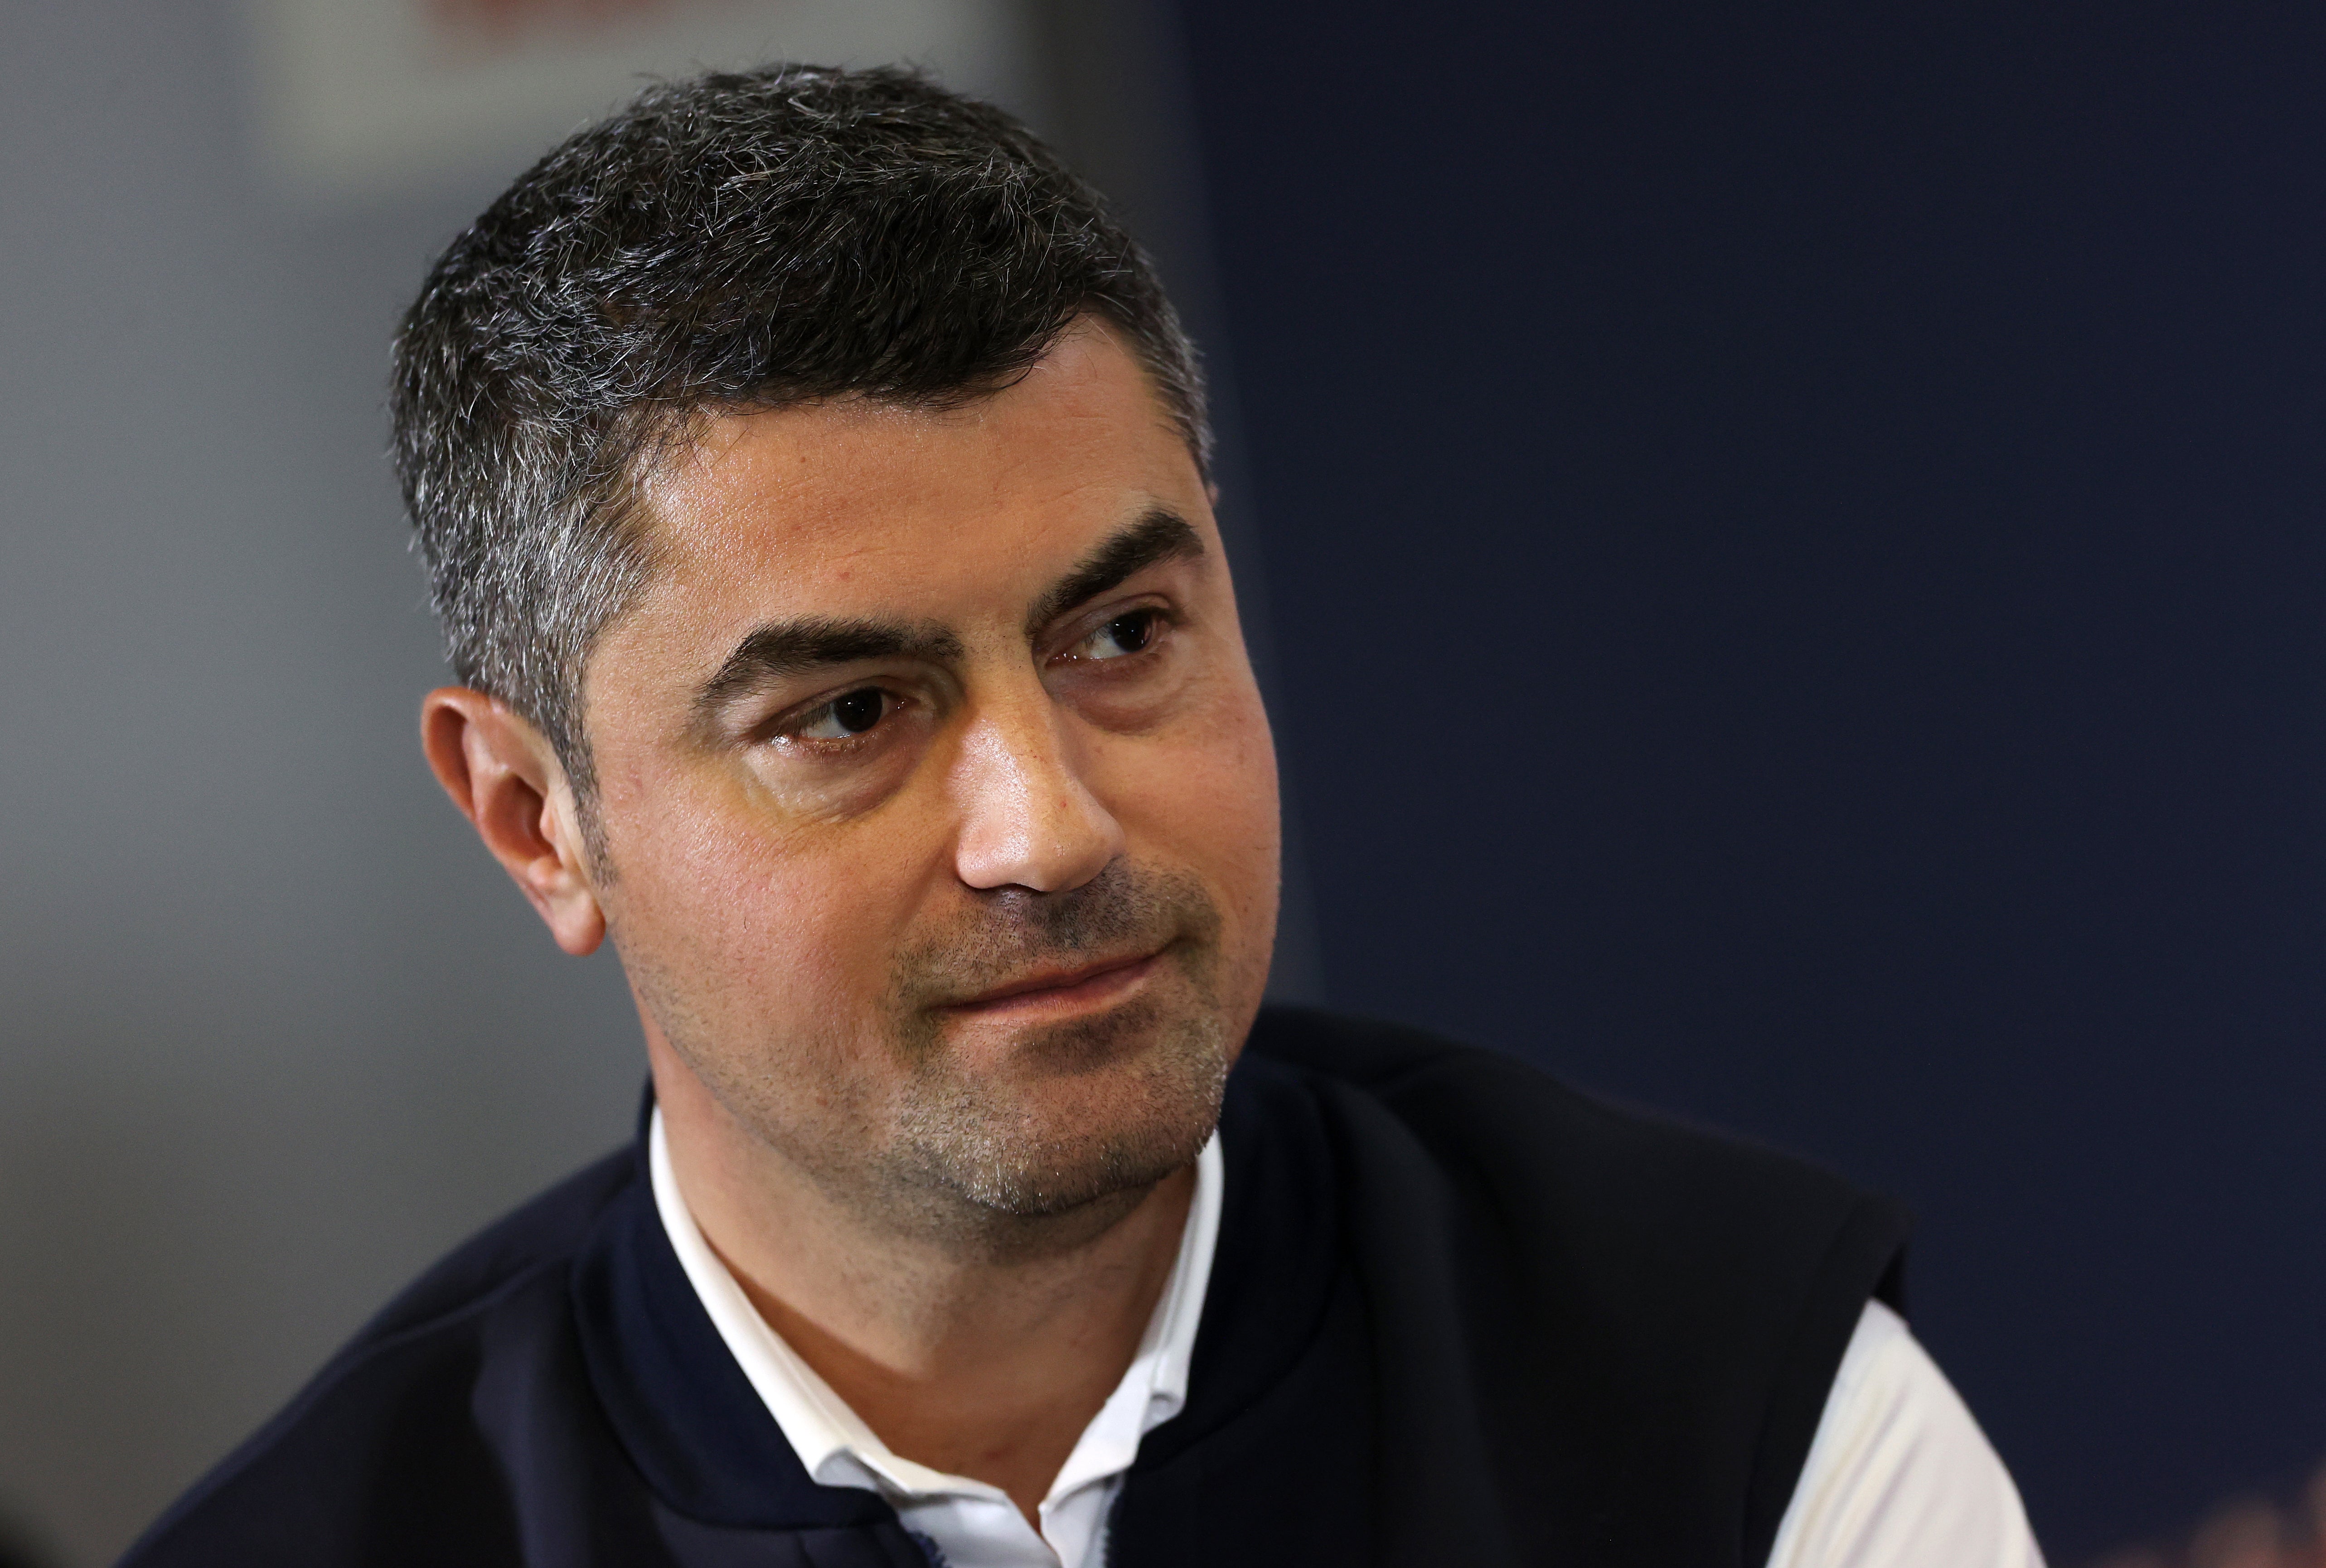 Formula 1 race director Michael Masi has been criticised for his role in the Abu Dhabi Grand Prix